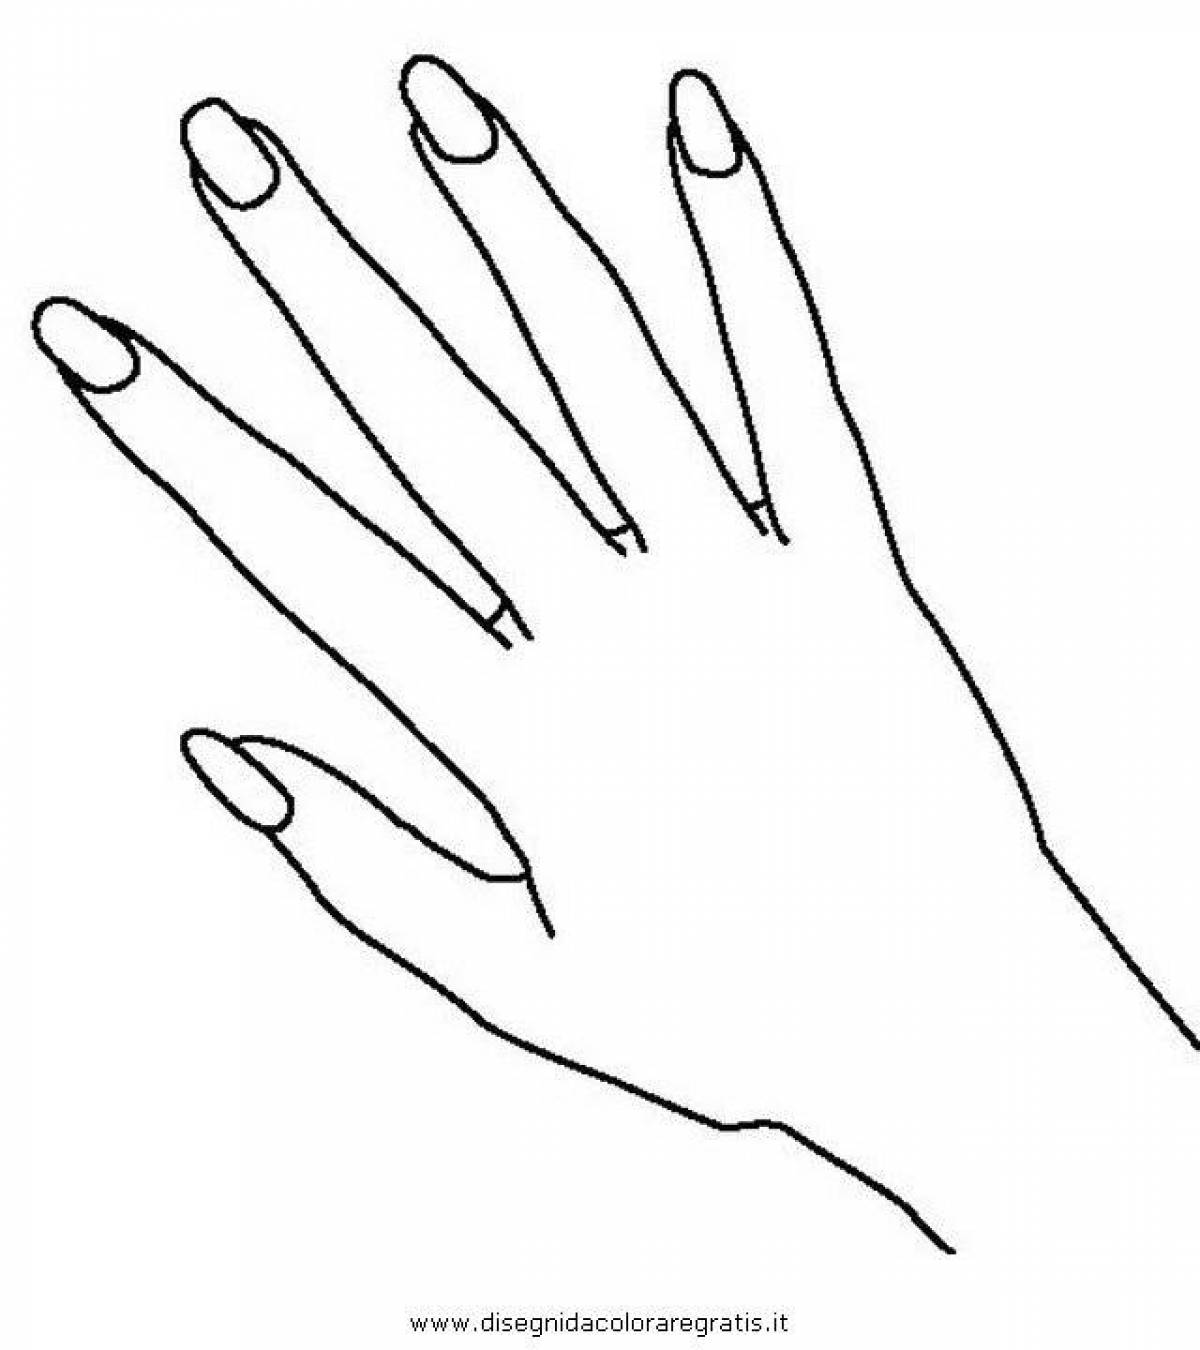 Coloring book playful hand with nails